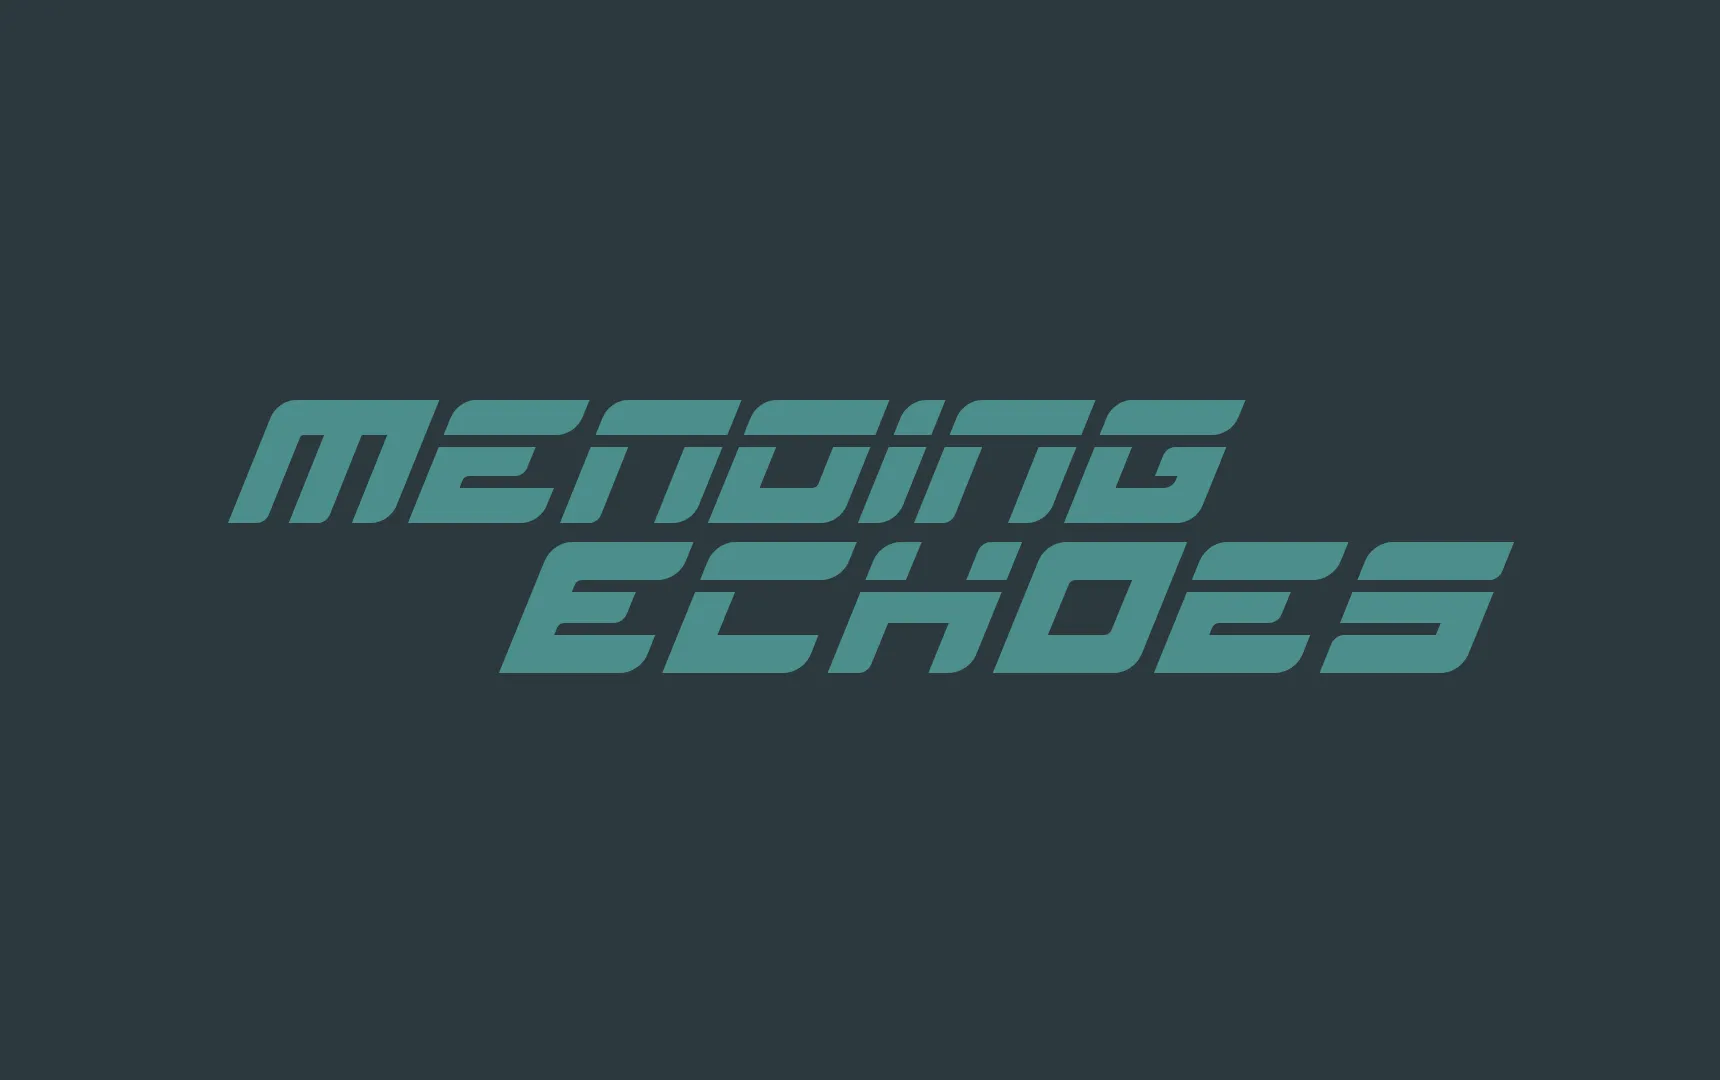 The logotype of Mending Echoes.